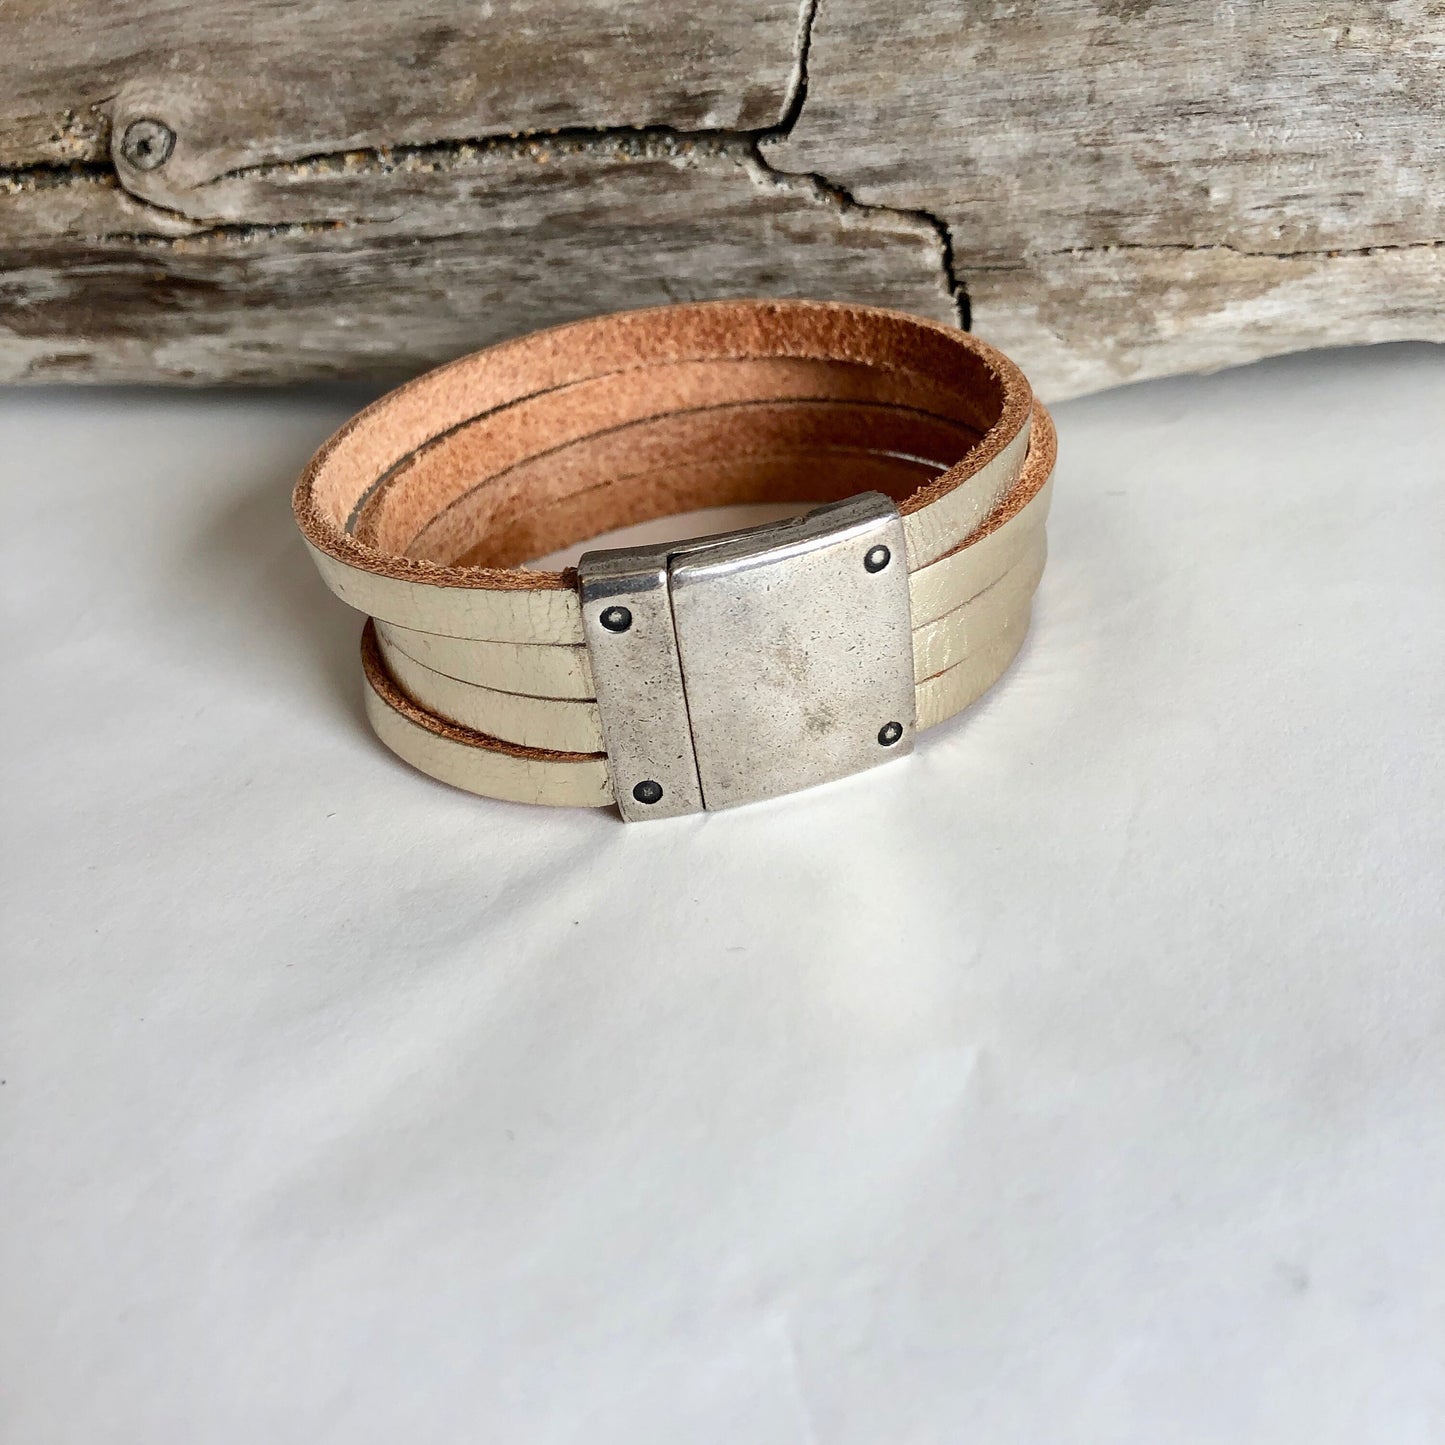 Leather bracelet, made with beautiful soft gold Italian leather, and finished with a quality silver magnetic riveted clasp.